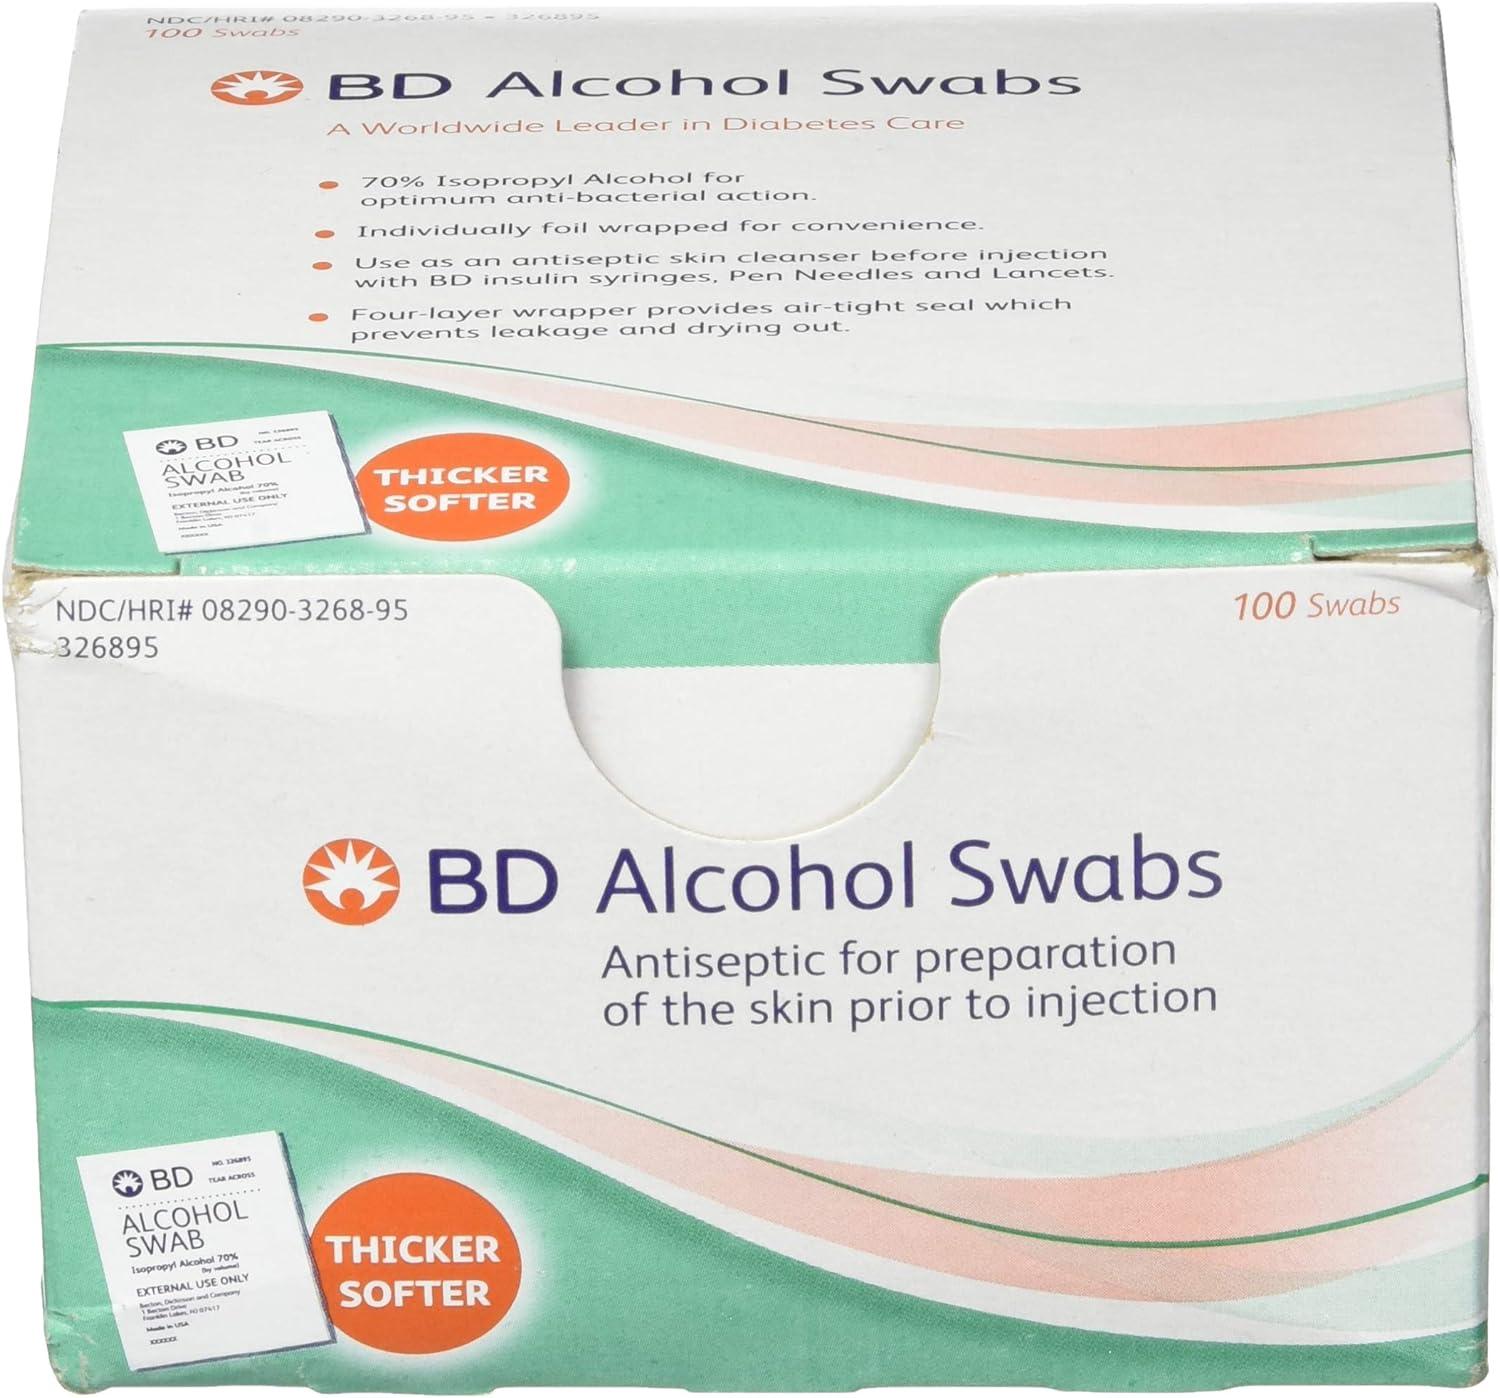 BD Alcohol Swabs 100 Count for $1.99 Shipped